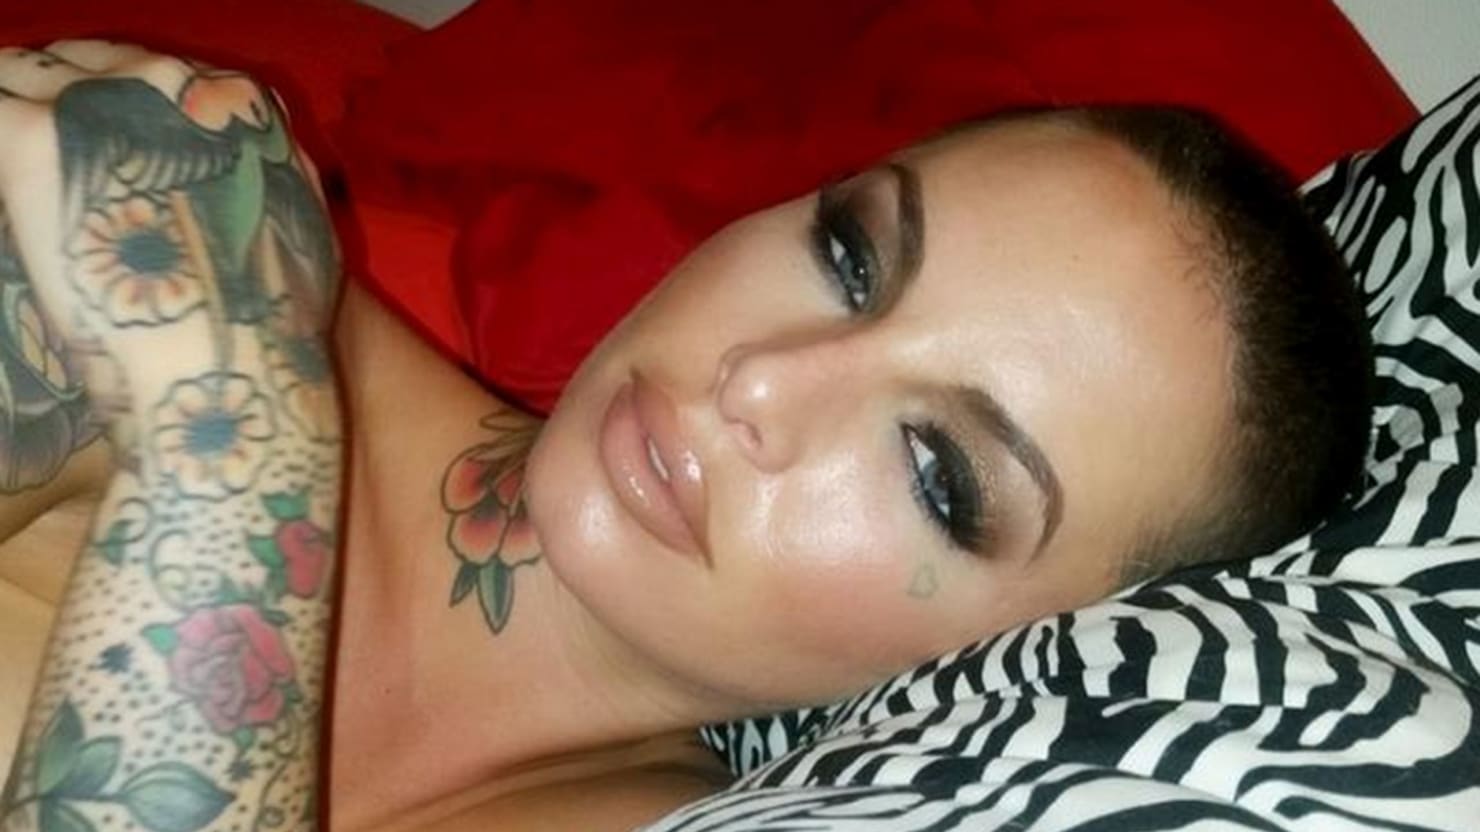 Christy Porn - Christy Mack Is Done With Porn